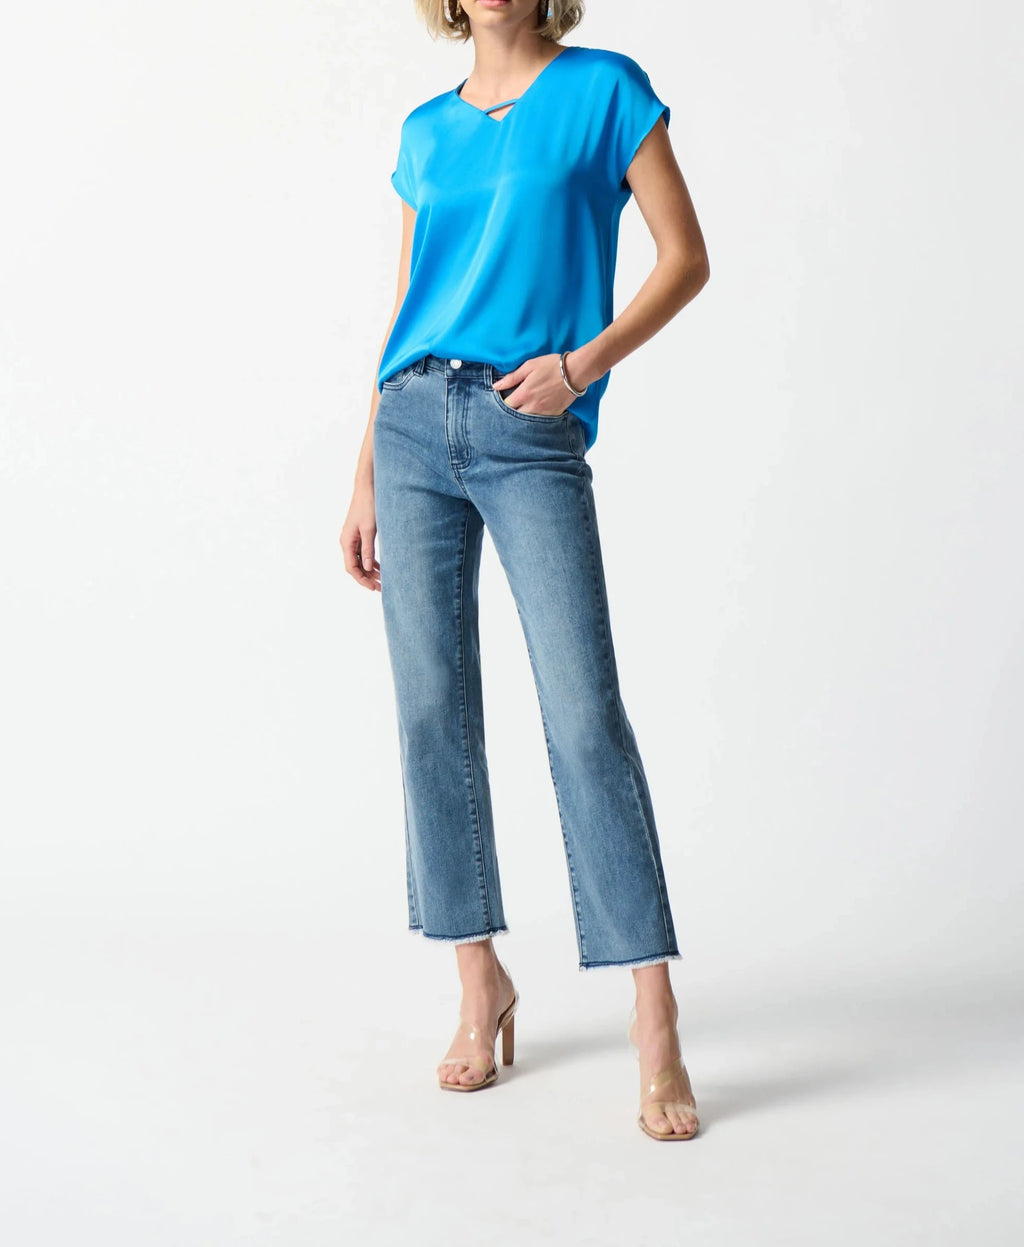 Satin Short Sleeve Top | French Blue